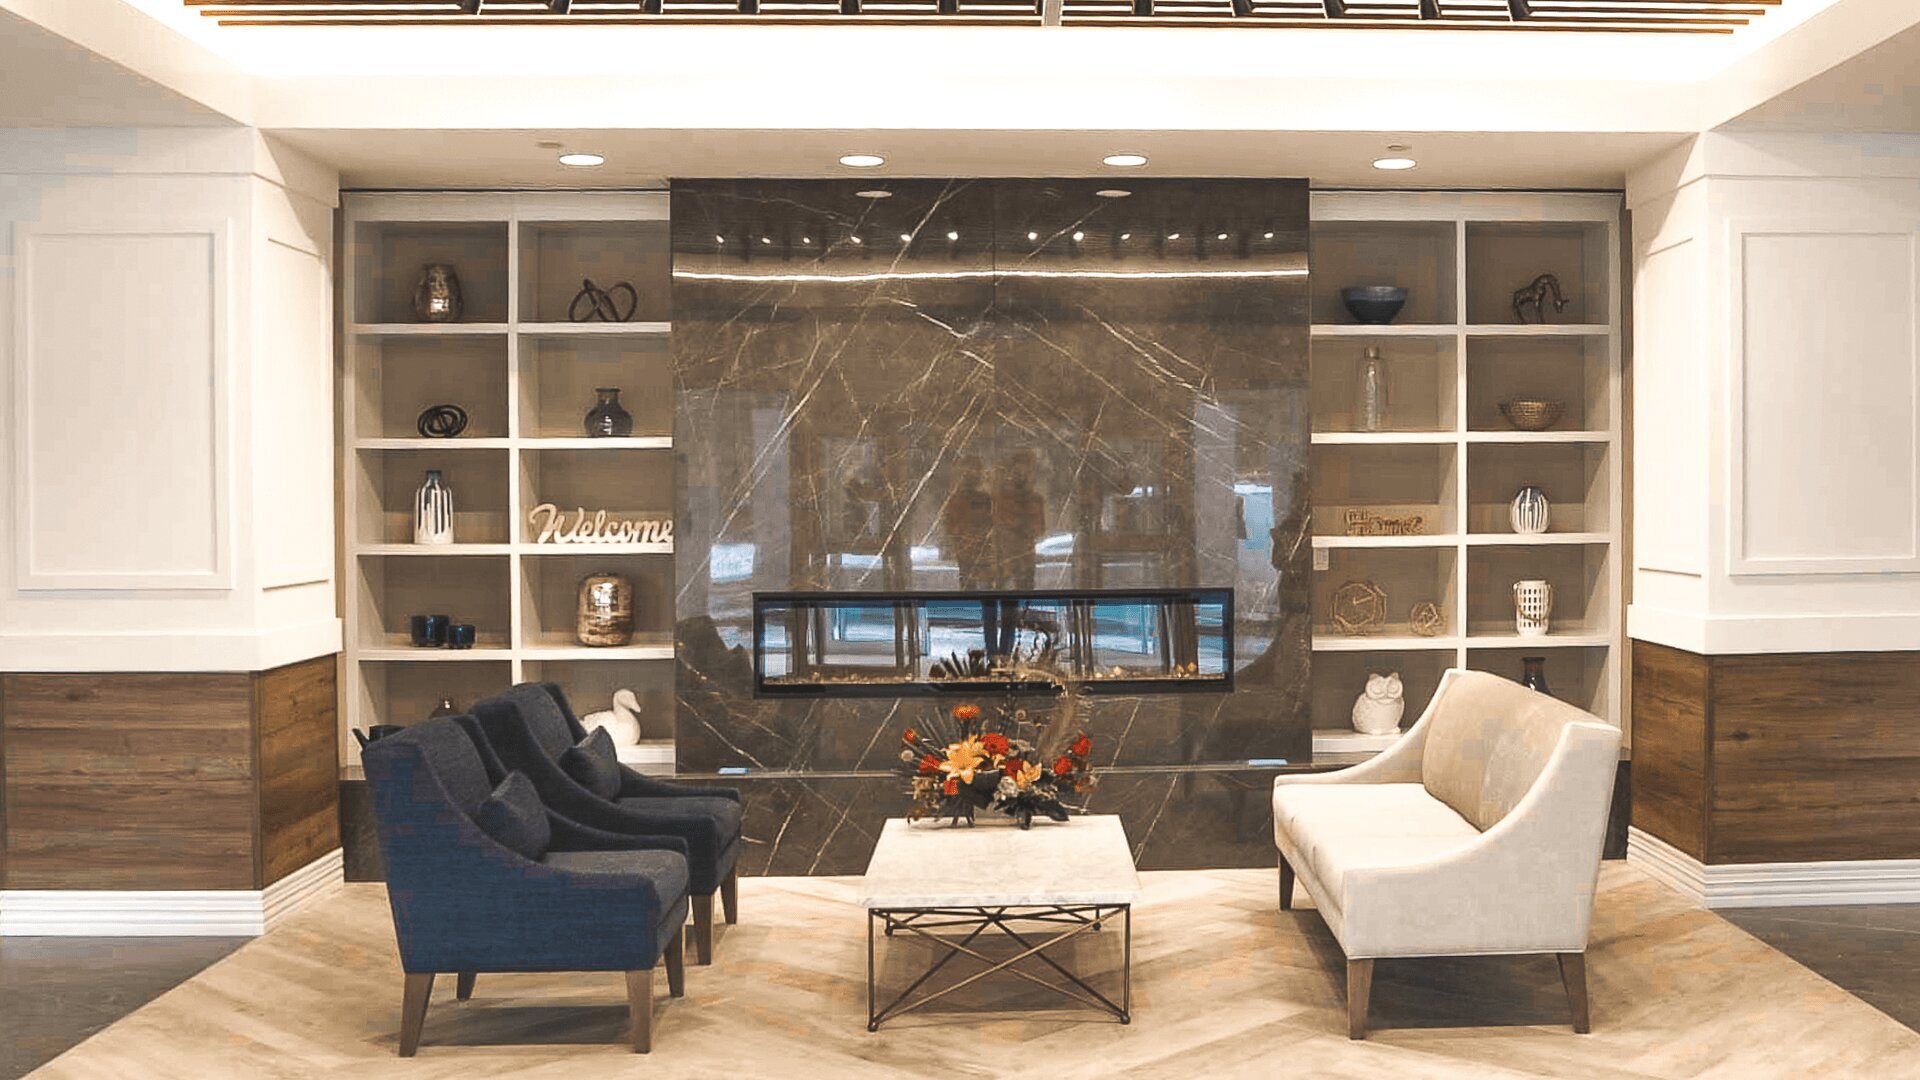 The lobby of Aster Gardens featuring a sitting area around a fireplace